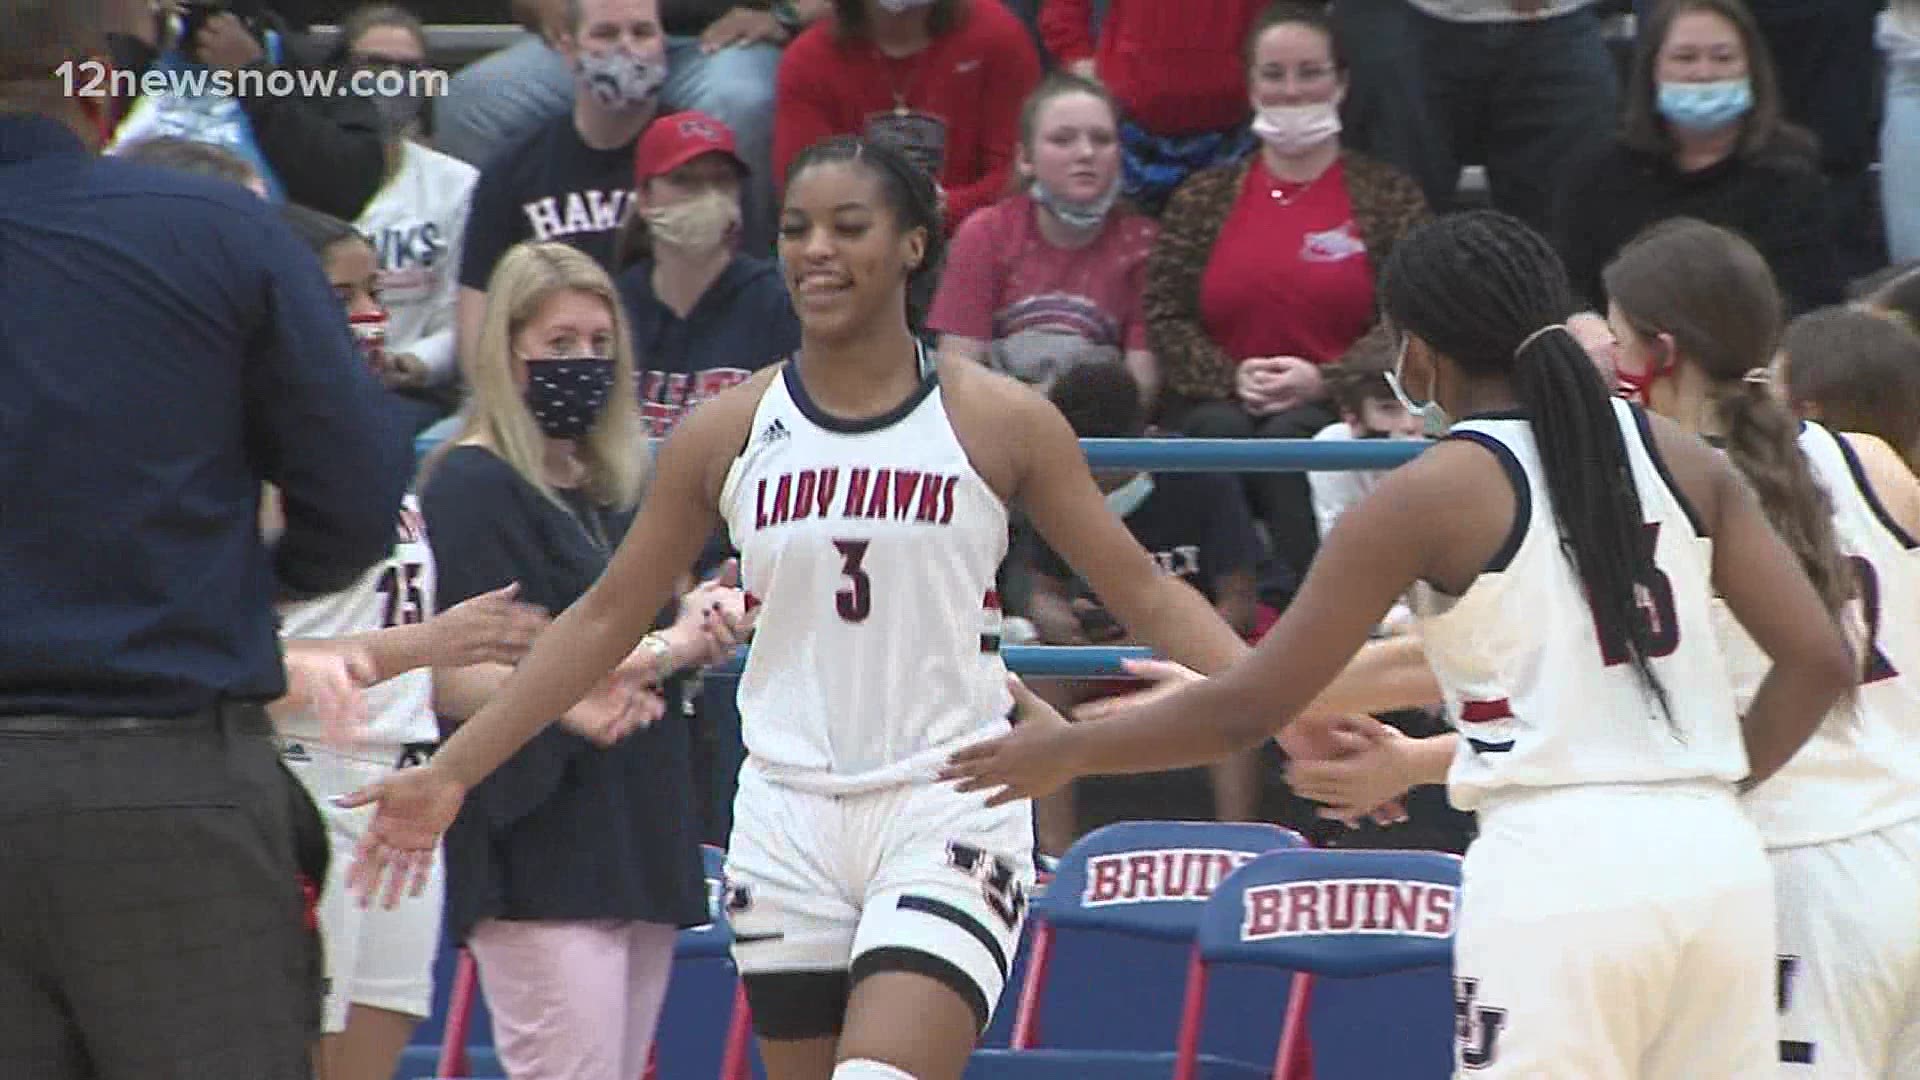 Hardin-Jefferson rolls into Regional Semifinals with win over rival Silsbee